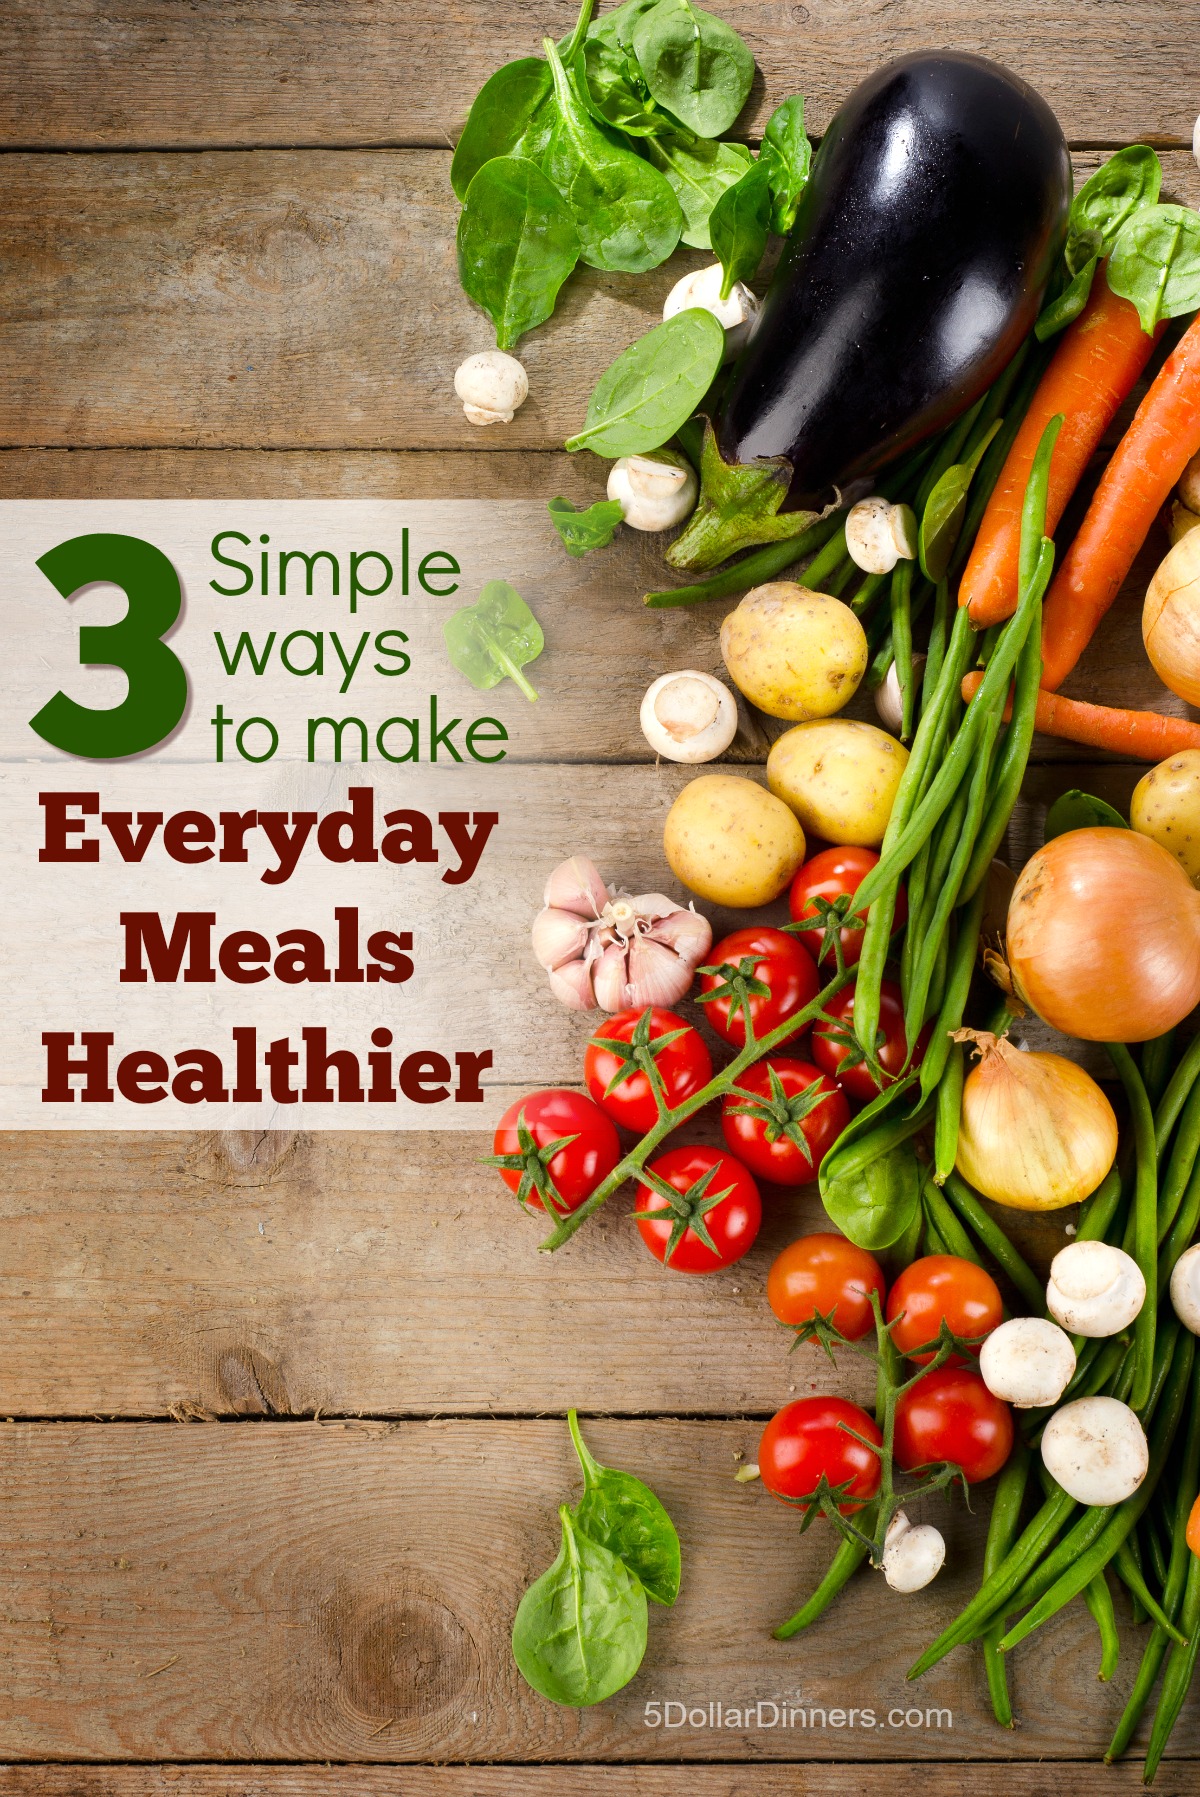 3 Simple Ways to Make Everyday Meals Healthier from 5DollarDinners.com